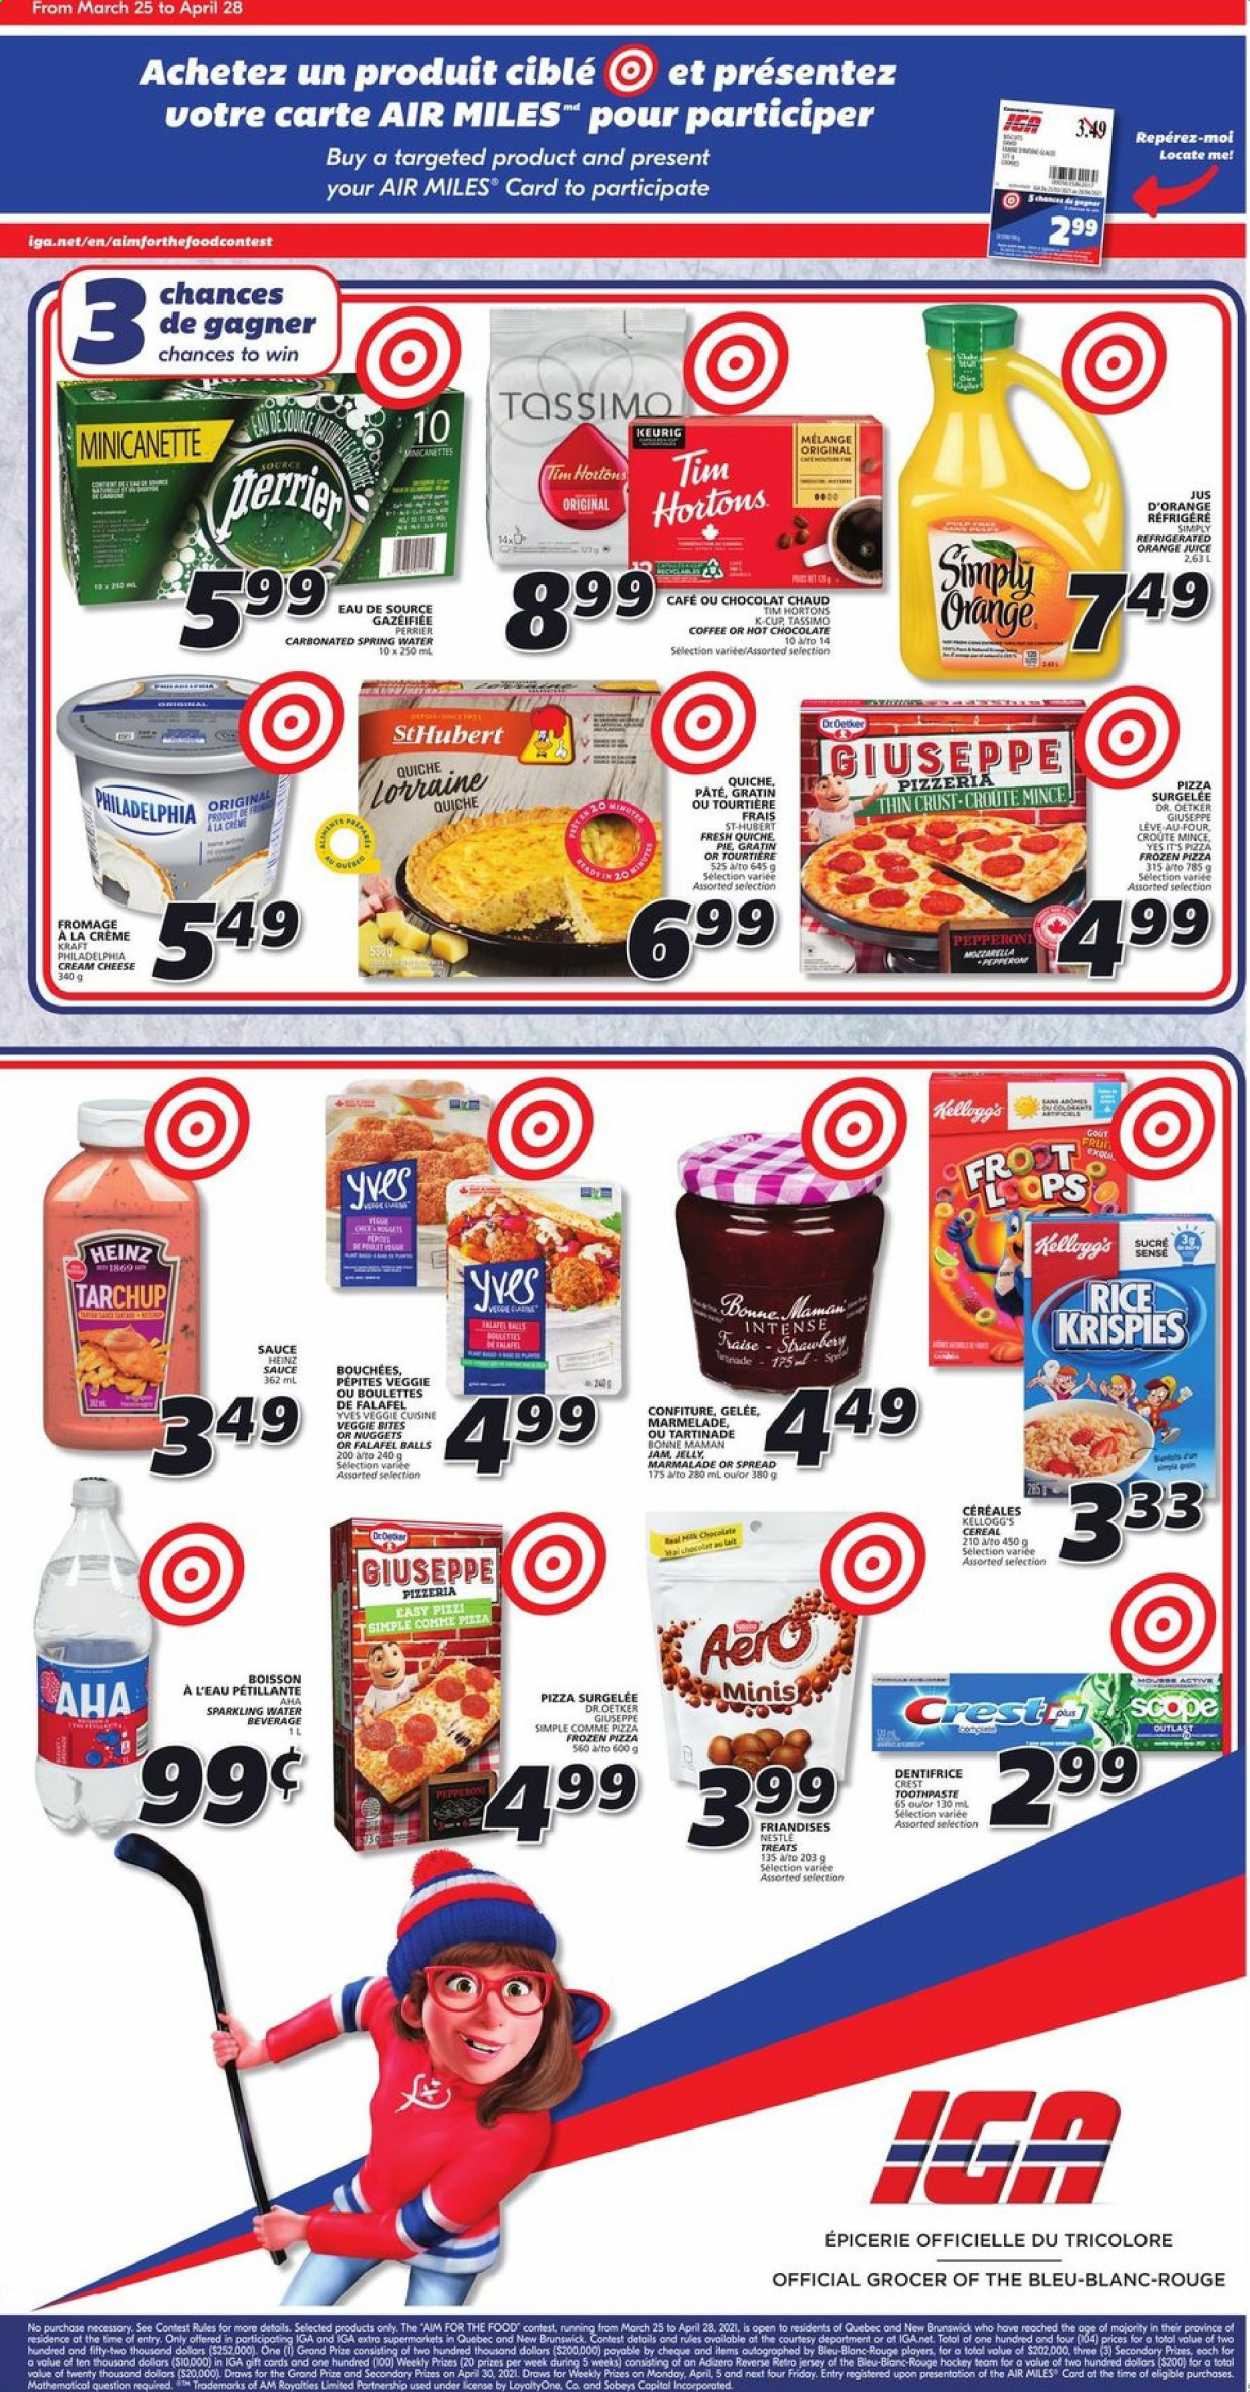 thumbnail - IGA Flyer - March 25, 2021 - April 28, 2021 - Sales products - pie, pizza, nuggets, sauce, Kraft®, cream cheese, Dr. Oetker, quiche, jelly, Kellogg's, Heinz, cereals, Rice Krispies, fruit jam, orange juice, juice, Perrier, spring water, sparkling water, hot chocolate, coffee, coffee capsules, L'Or, K-Cups, Keurig, Nestlé. Page 2.